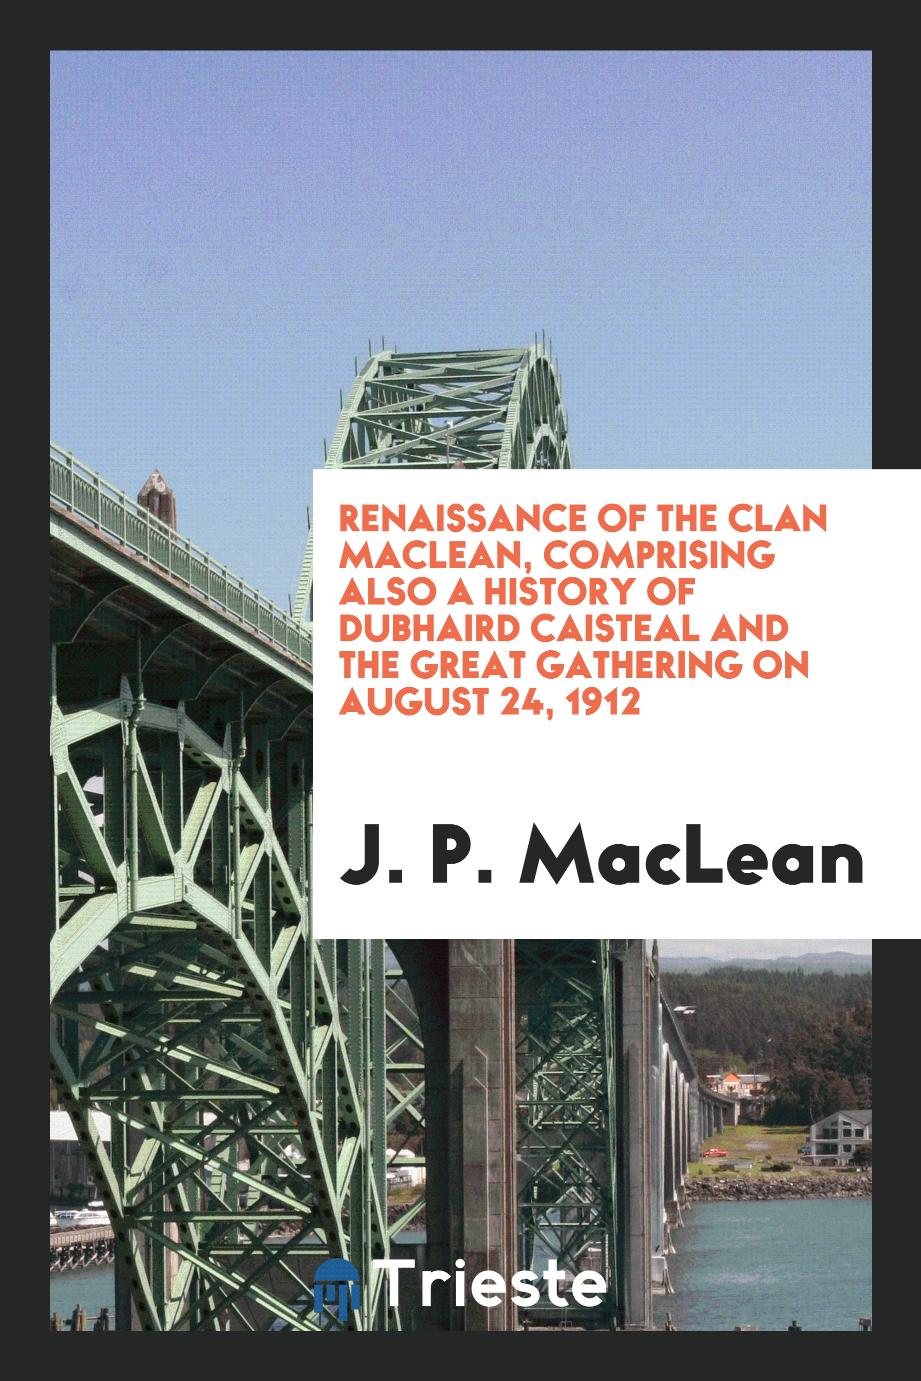 Renaissance of the Clan MacLean, Comprising Also a History of Dubhaird Caisteal and the Great Gathering on August 24, 1912